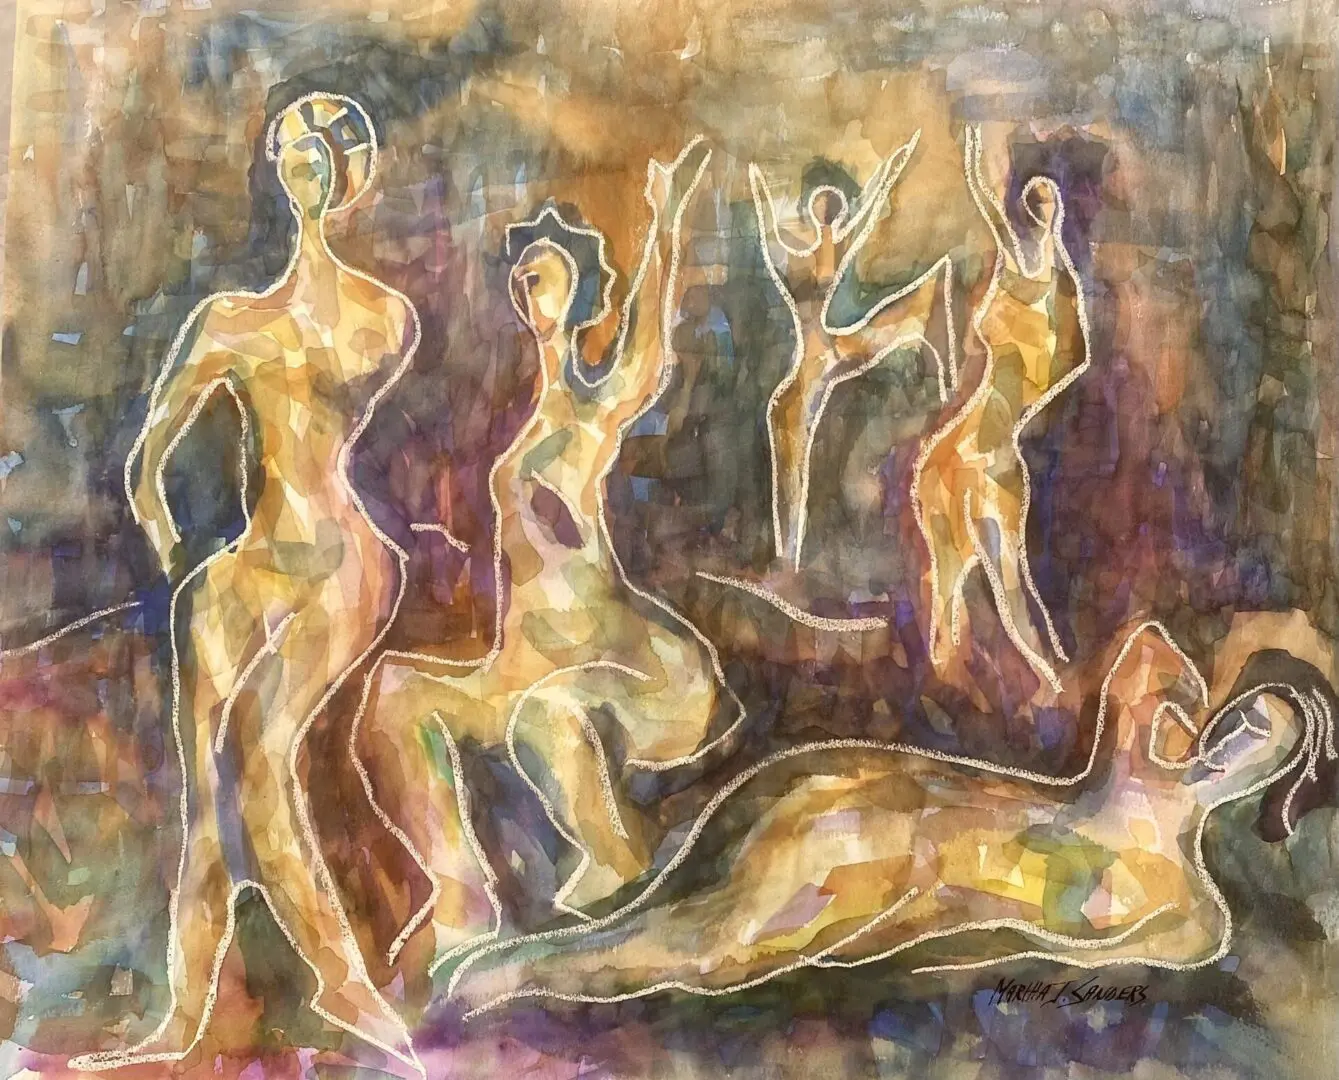 A painting of several different women in various poses.